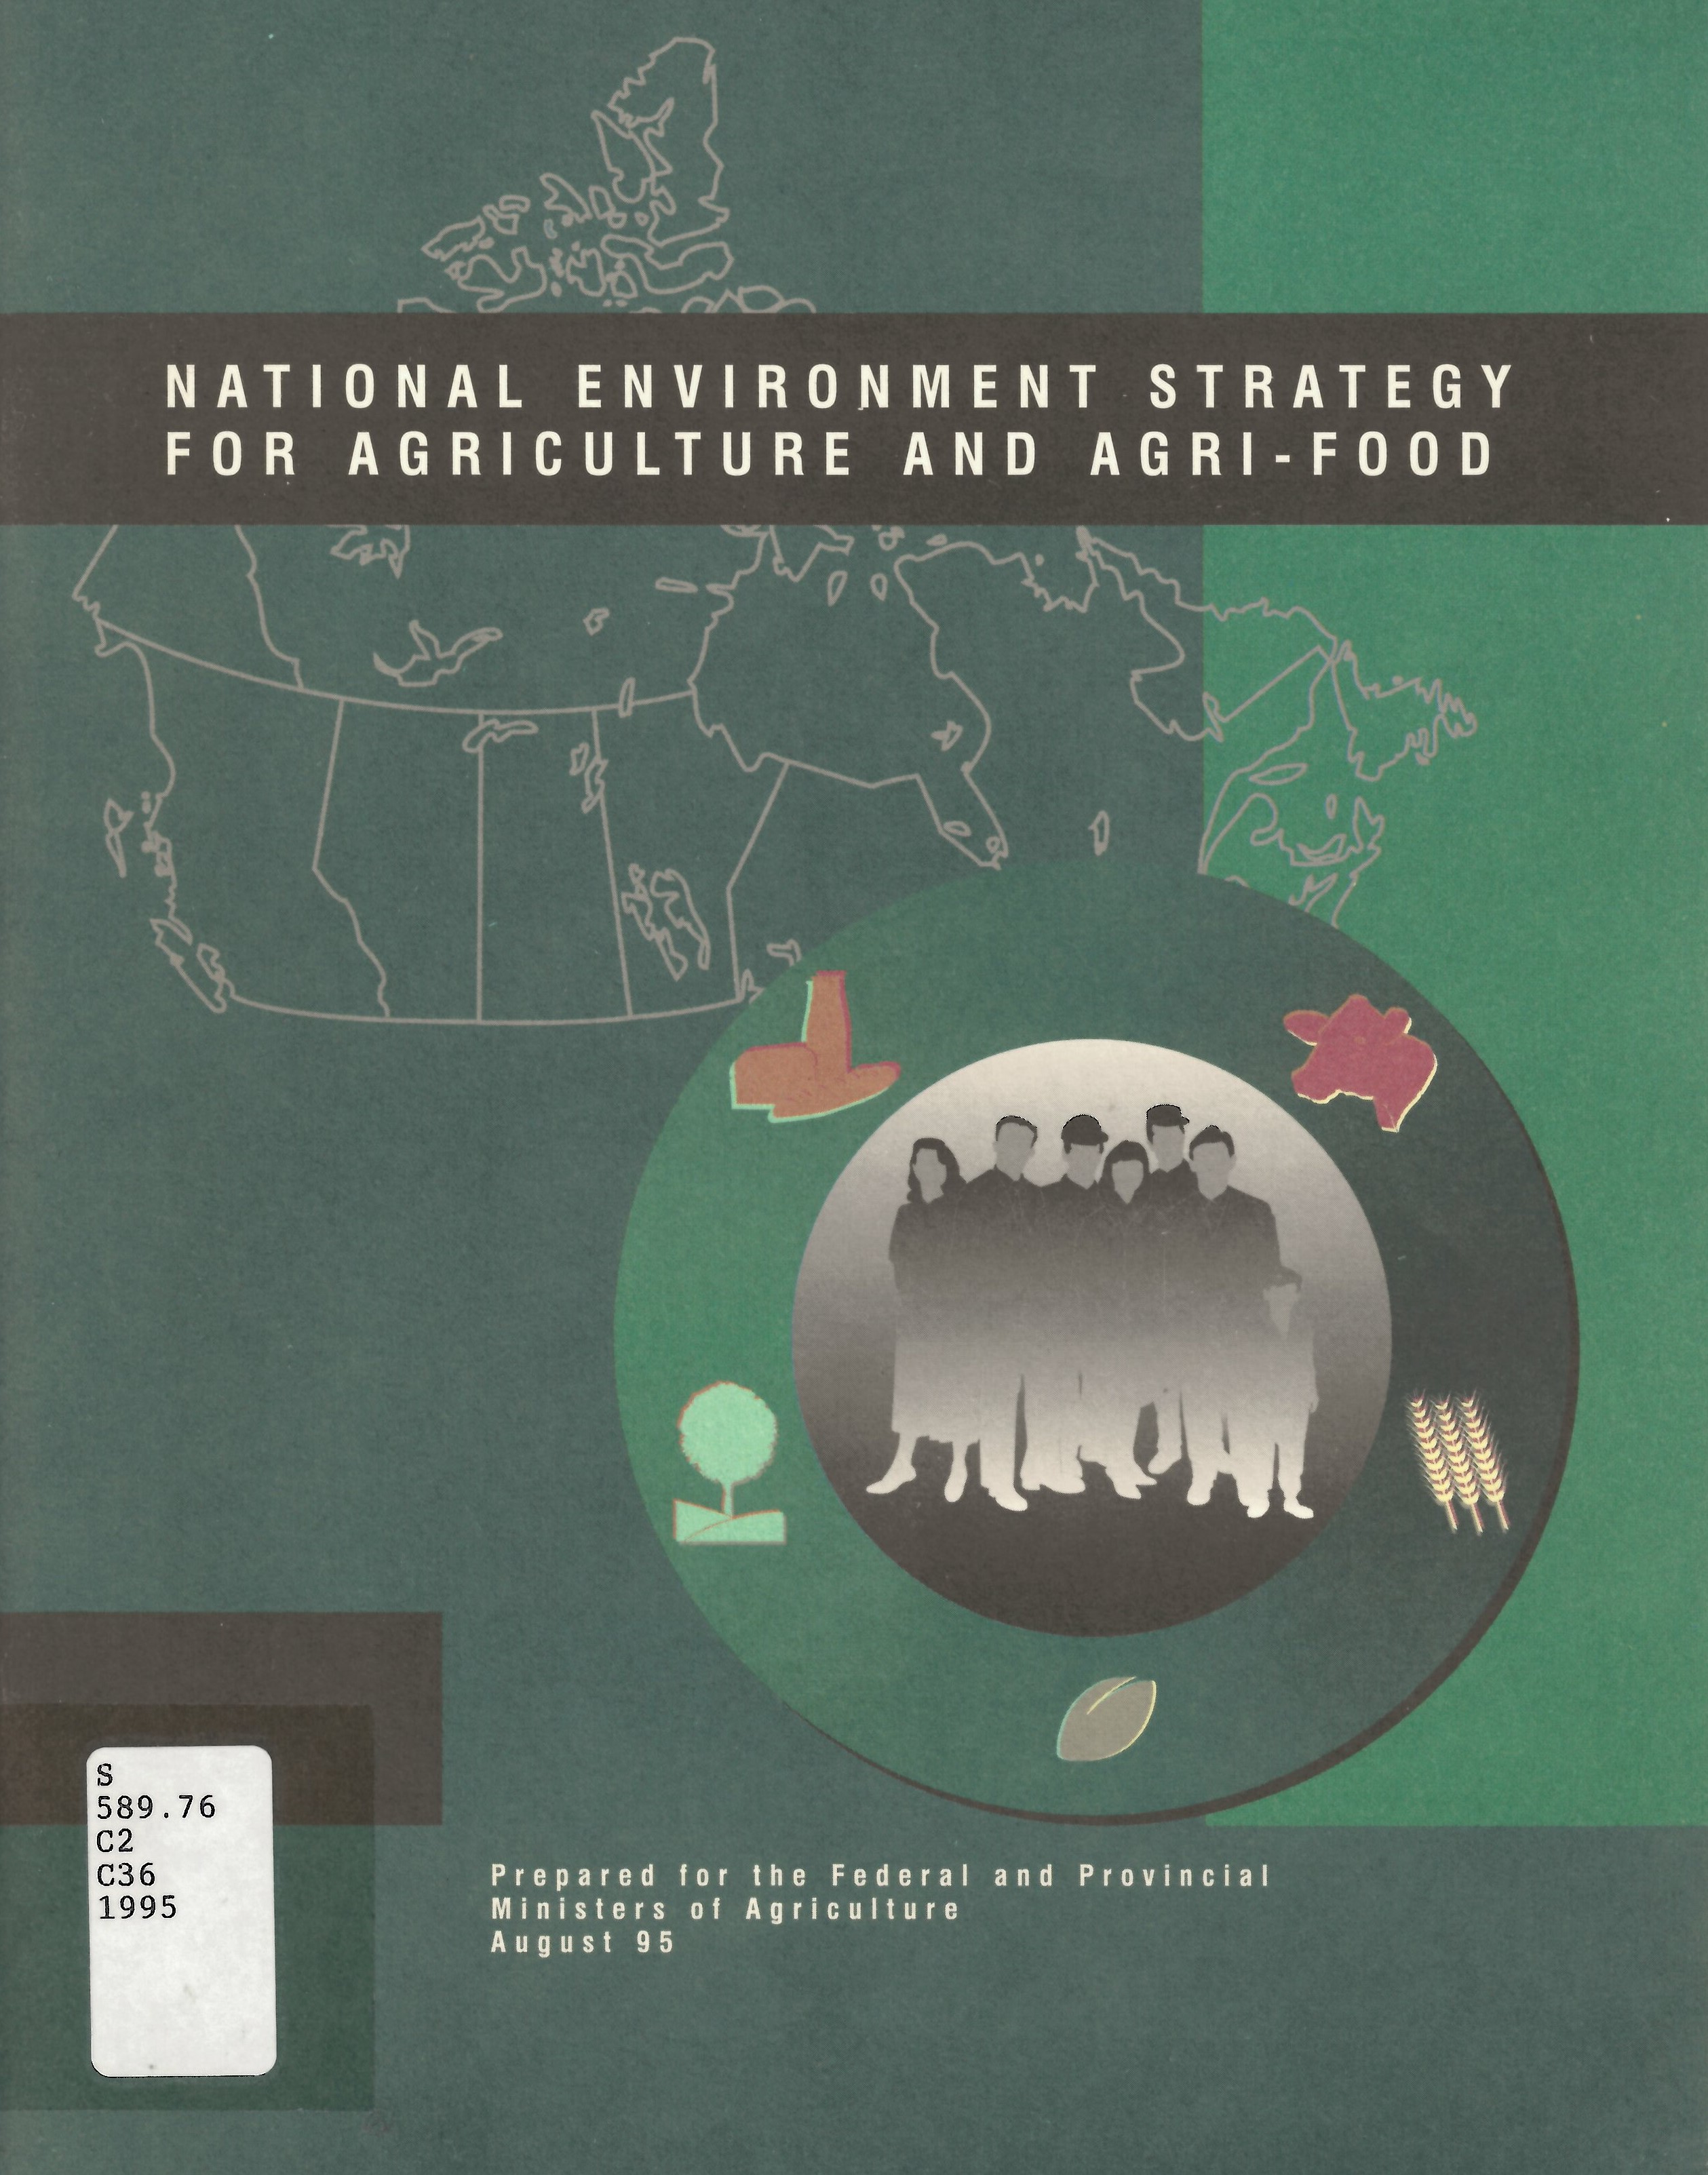 National environment strategy for agriculture and agri-food